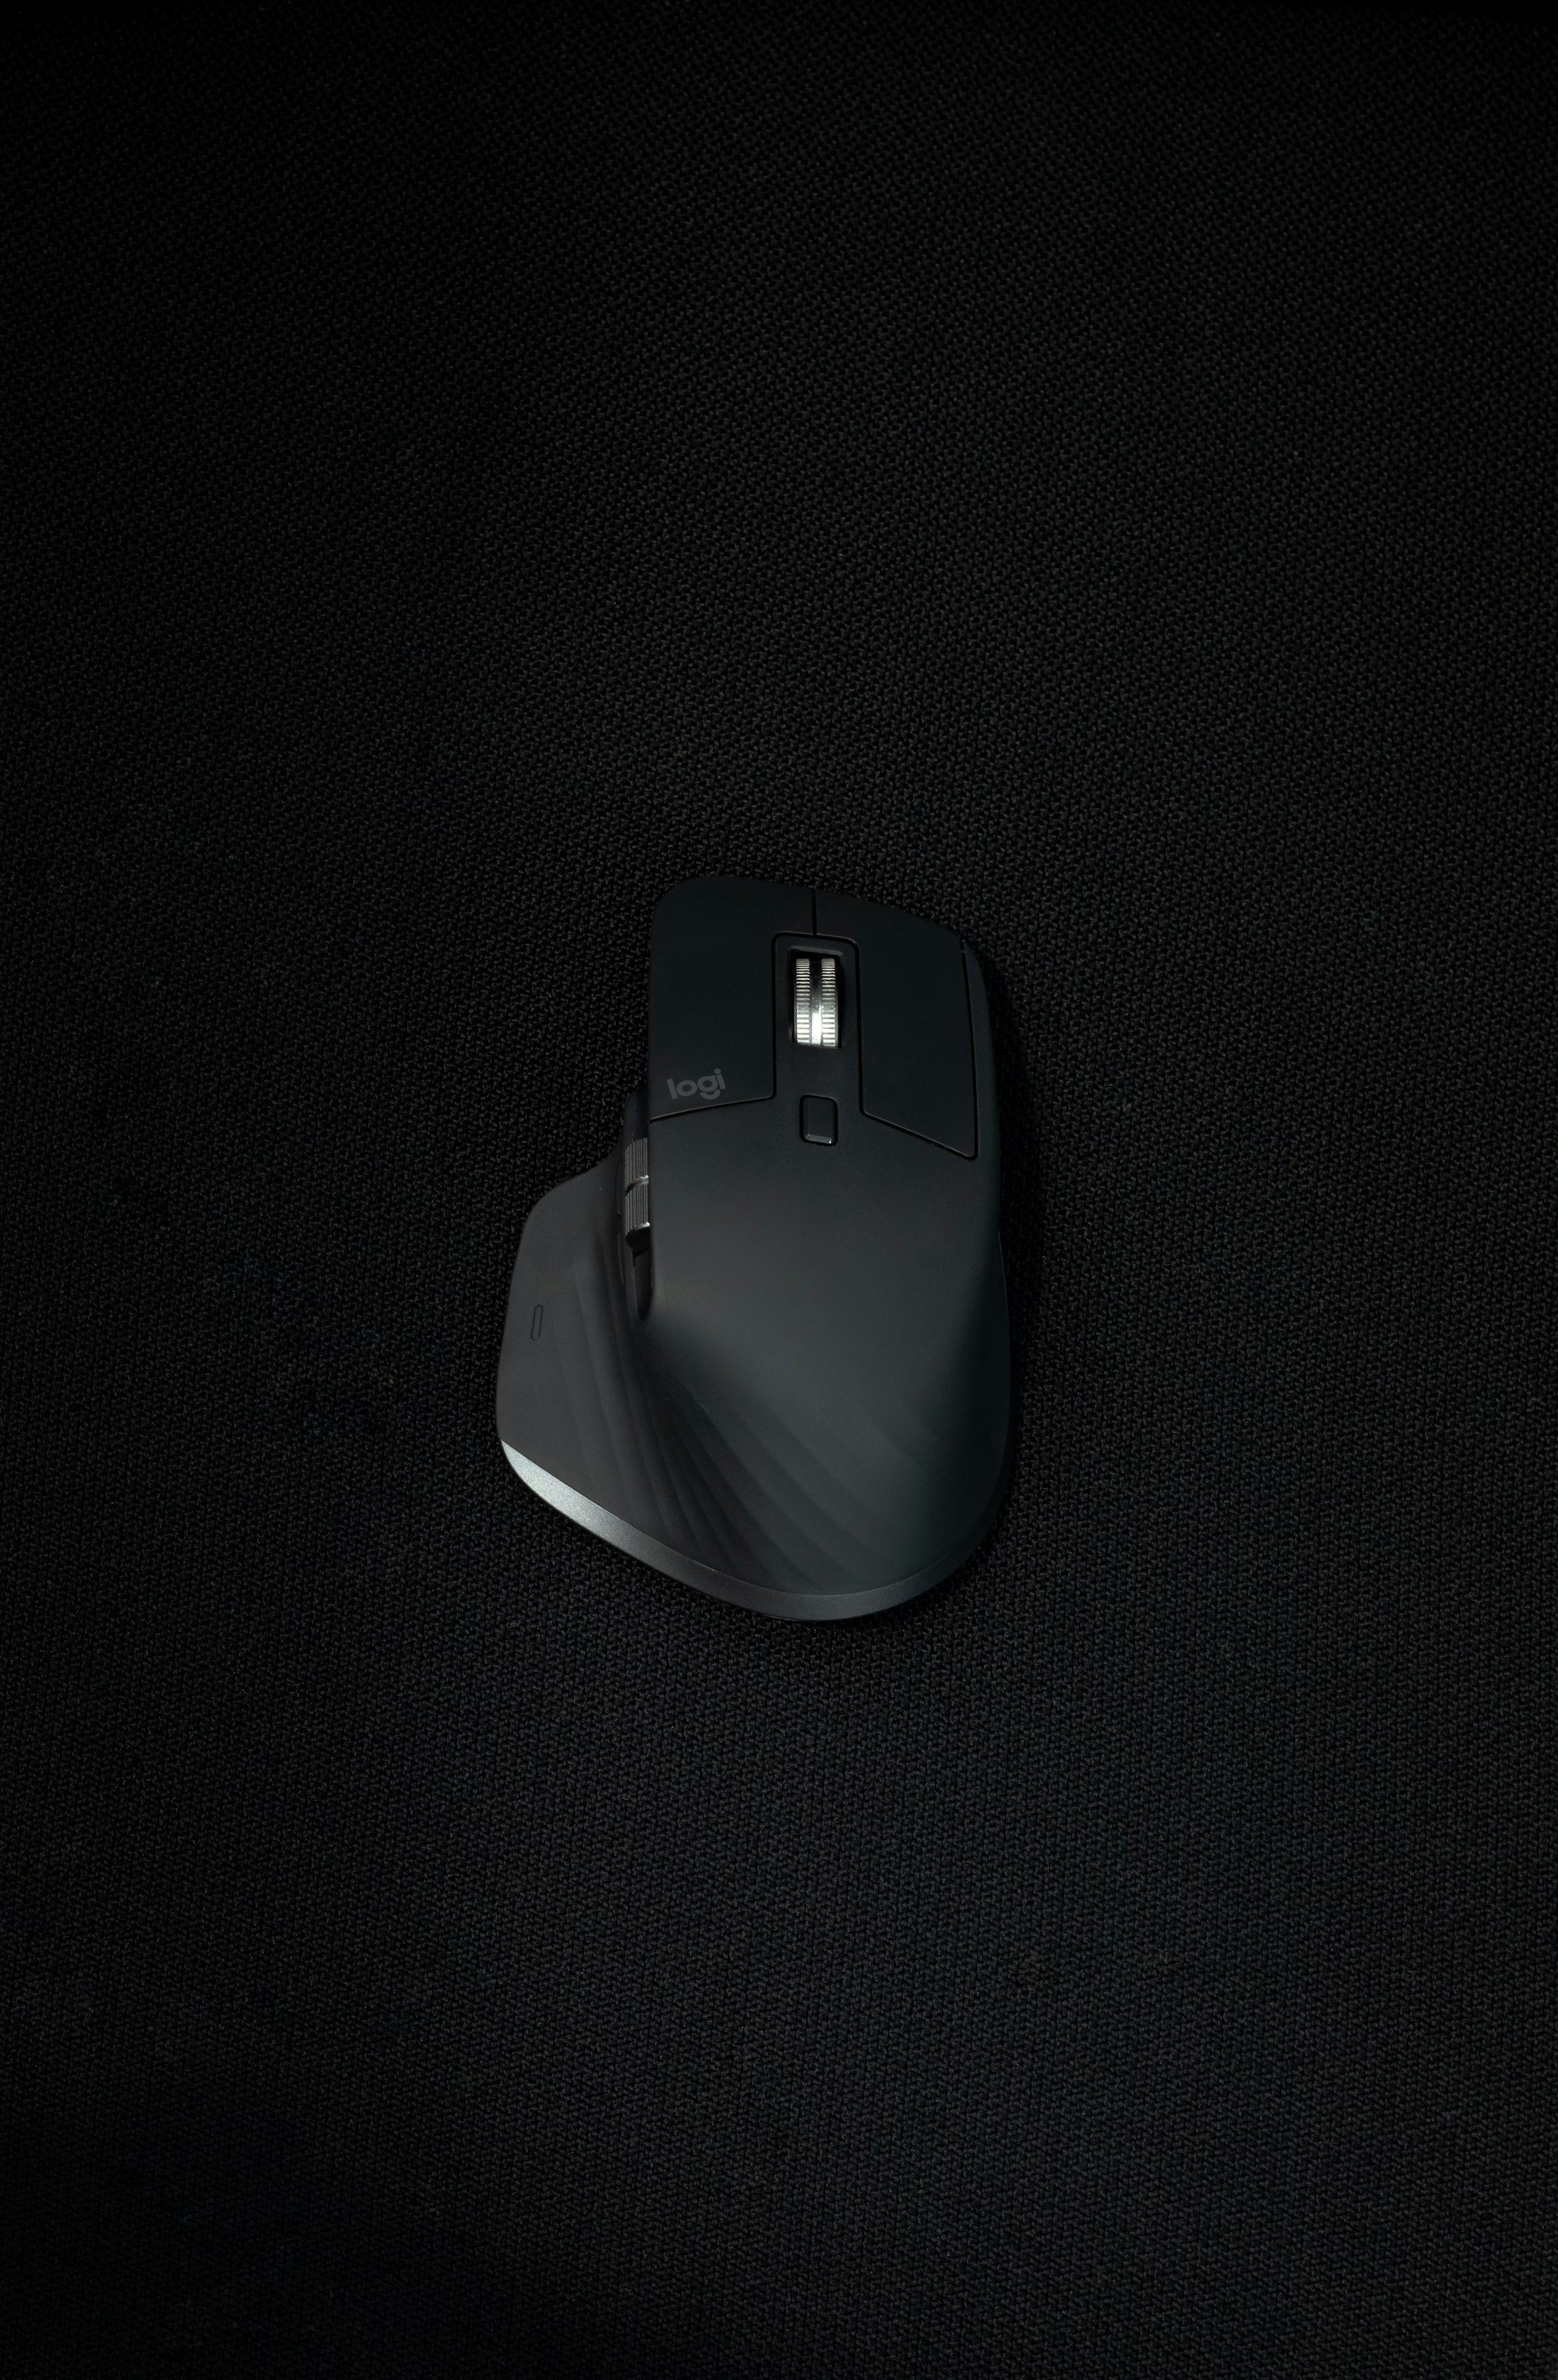 You have to make sure to get a mouse that suits you more than anything else.